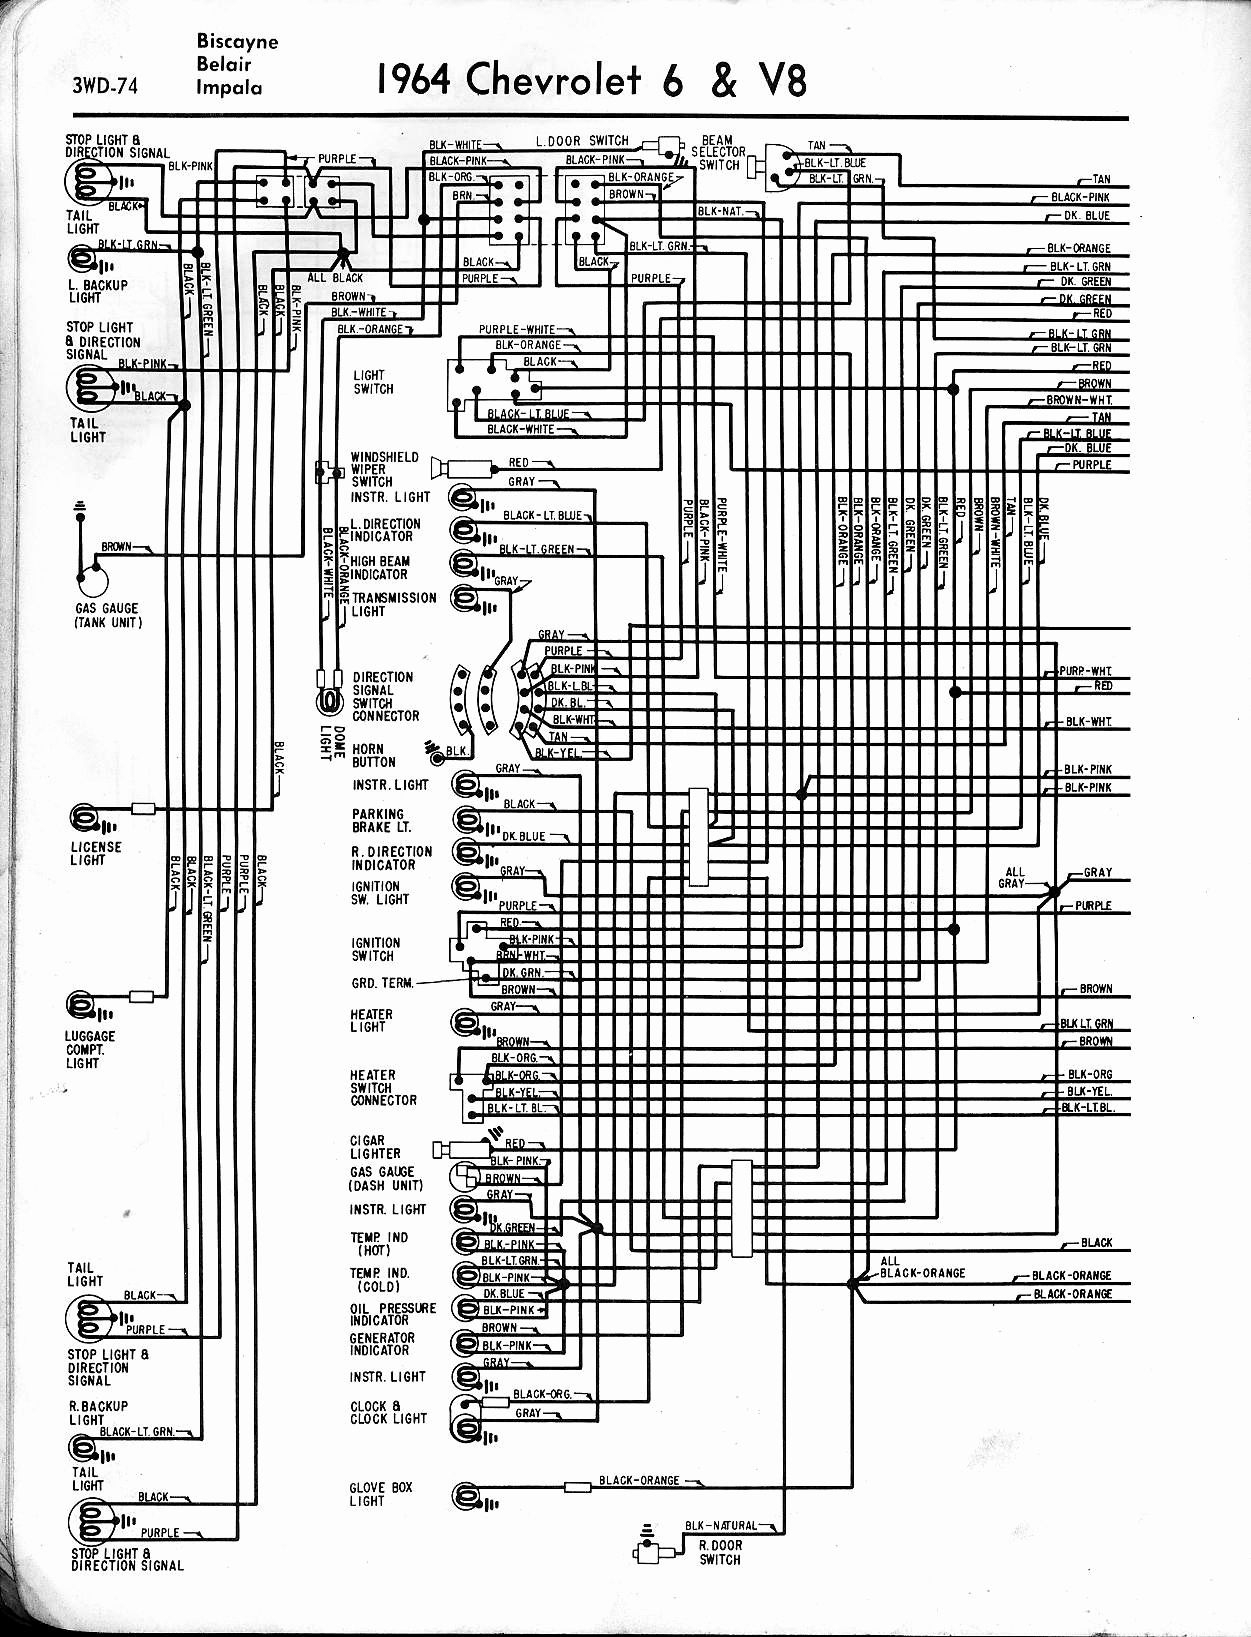 Stereo Wiring Diagram 2005 Chevy Impala | Wiring Diagram - 2004 Chevy Impala Radio Wiring Diagram